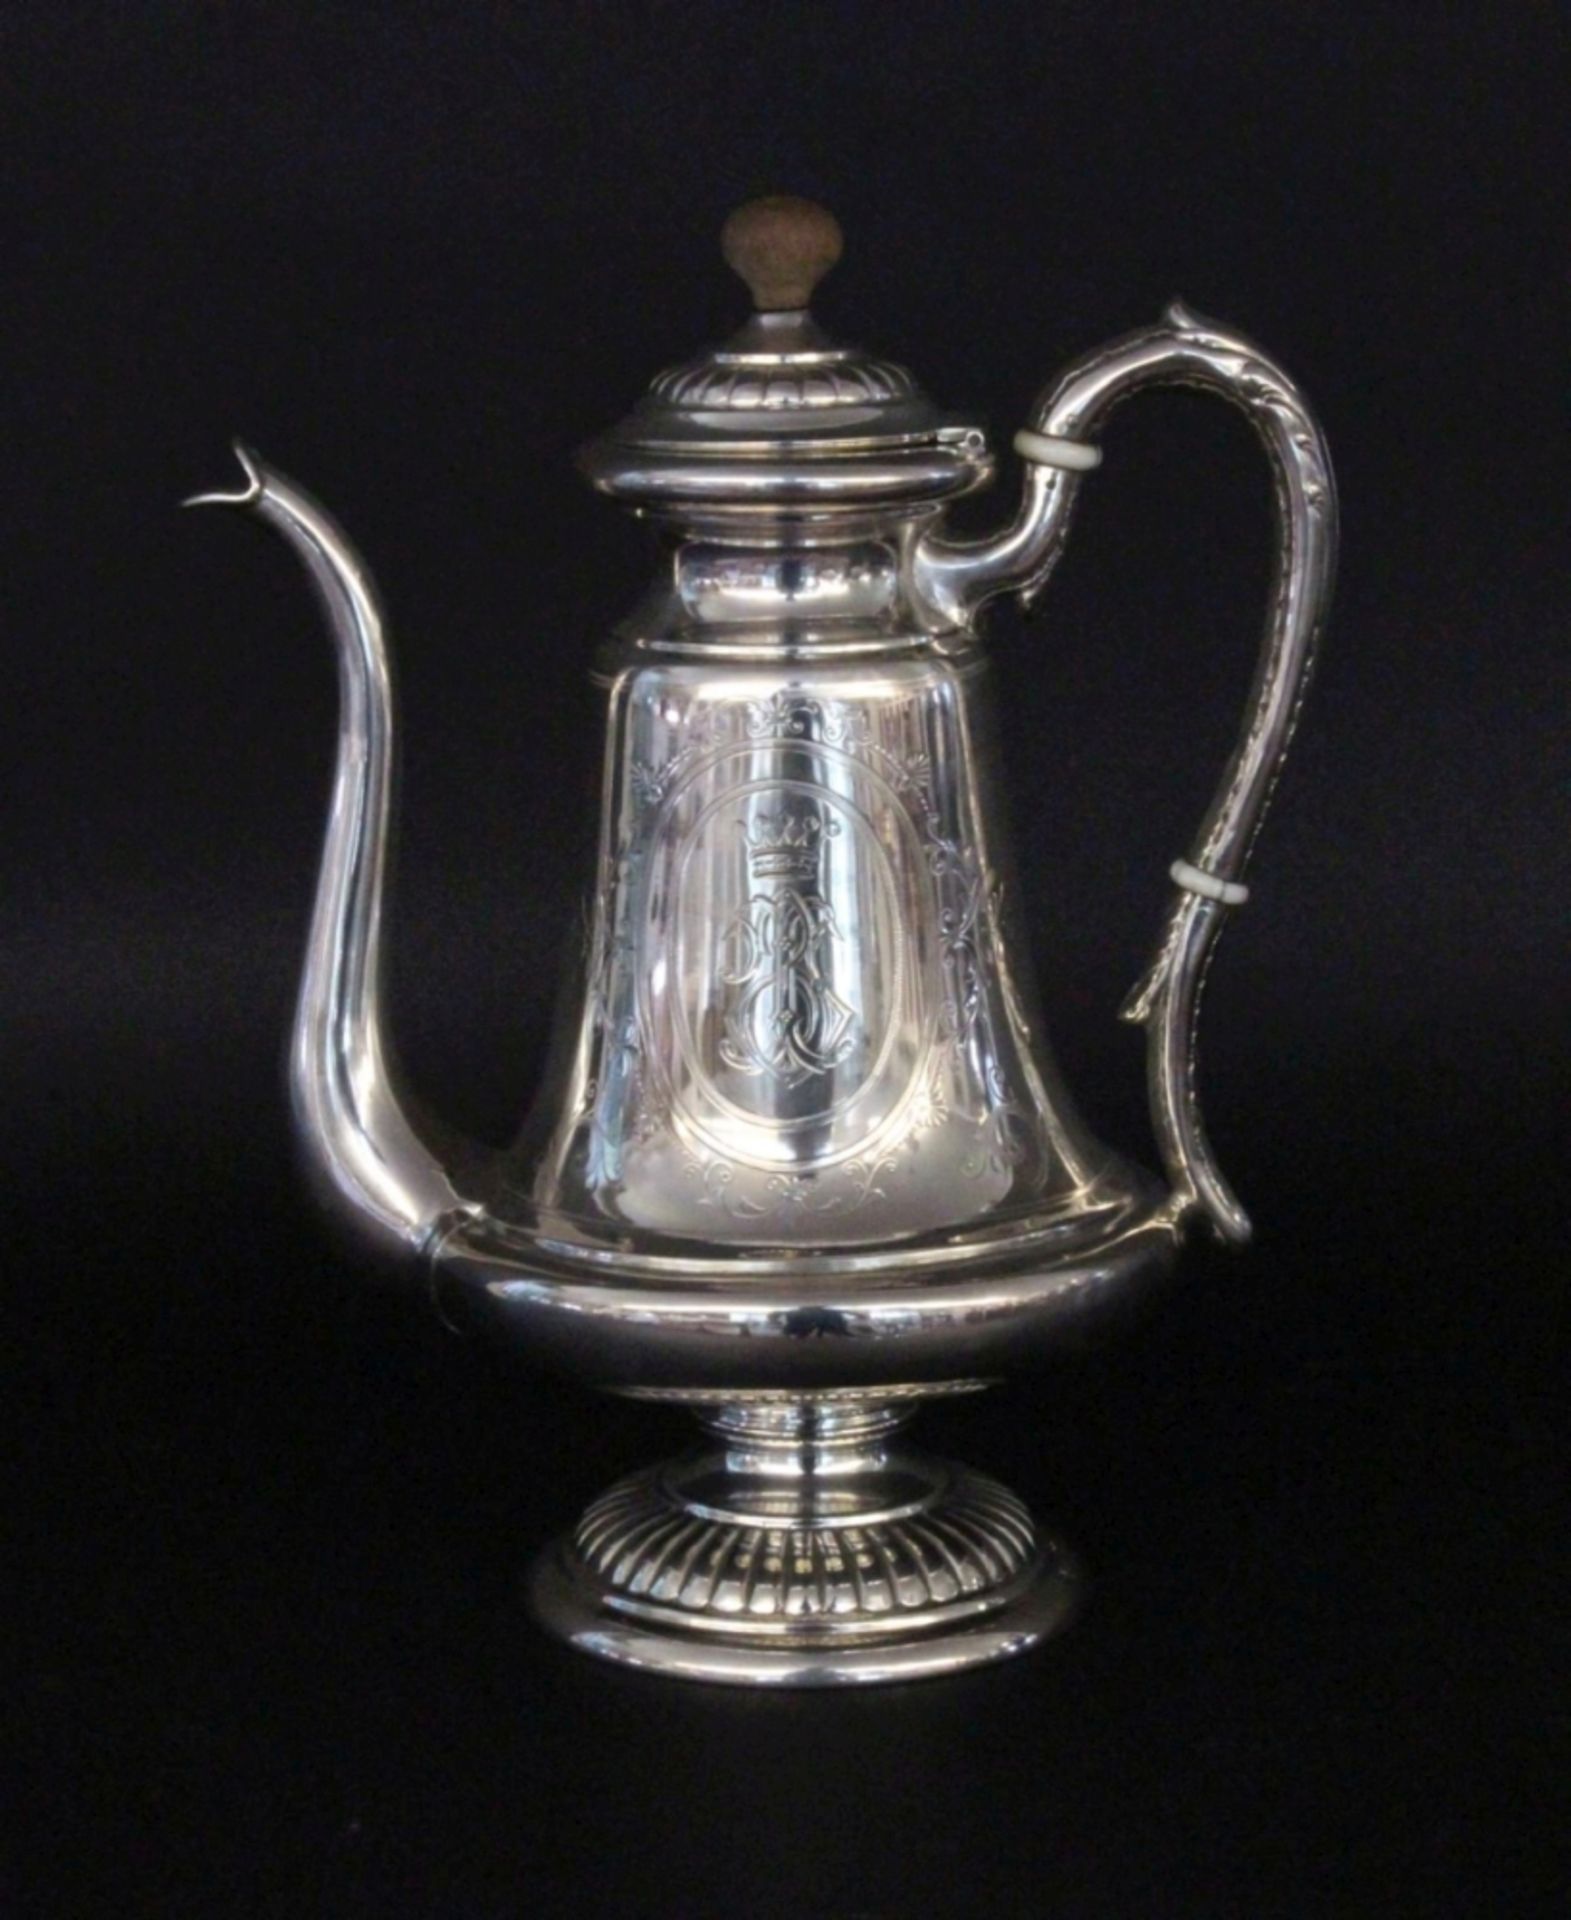 A COFFEE POT 1872 - Vienna - 1922 Chased decoration with crowned monogram. Manufacturer: